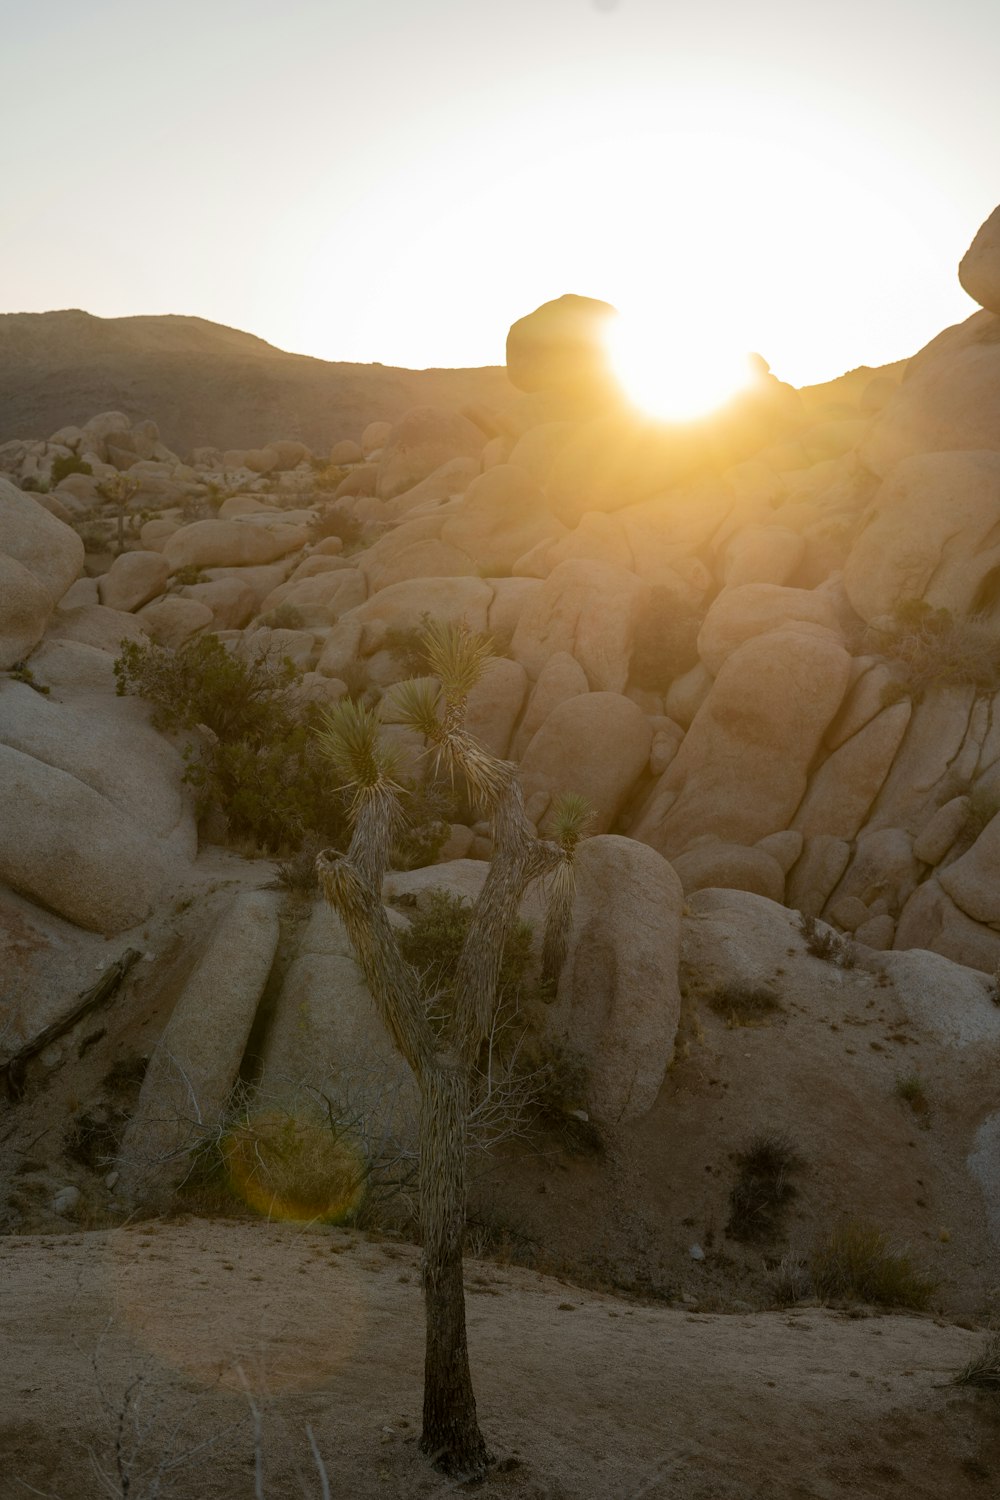 the sun is setting over a rocky landscape